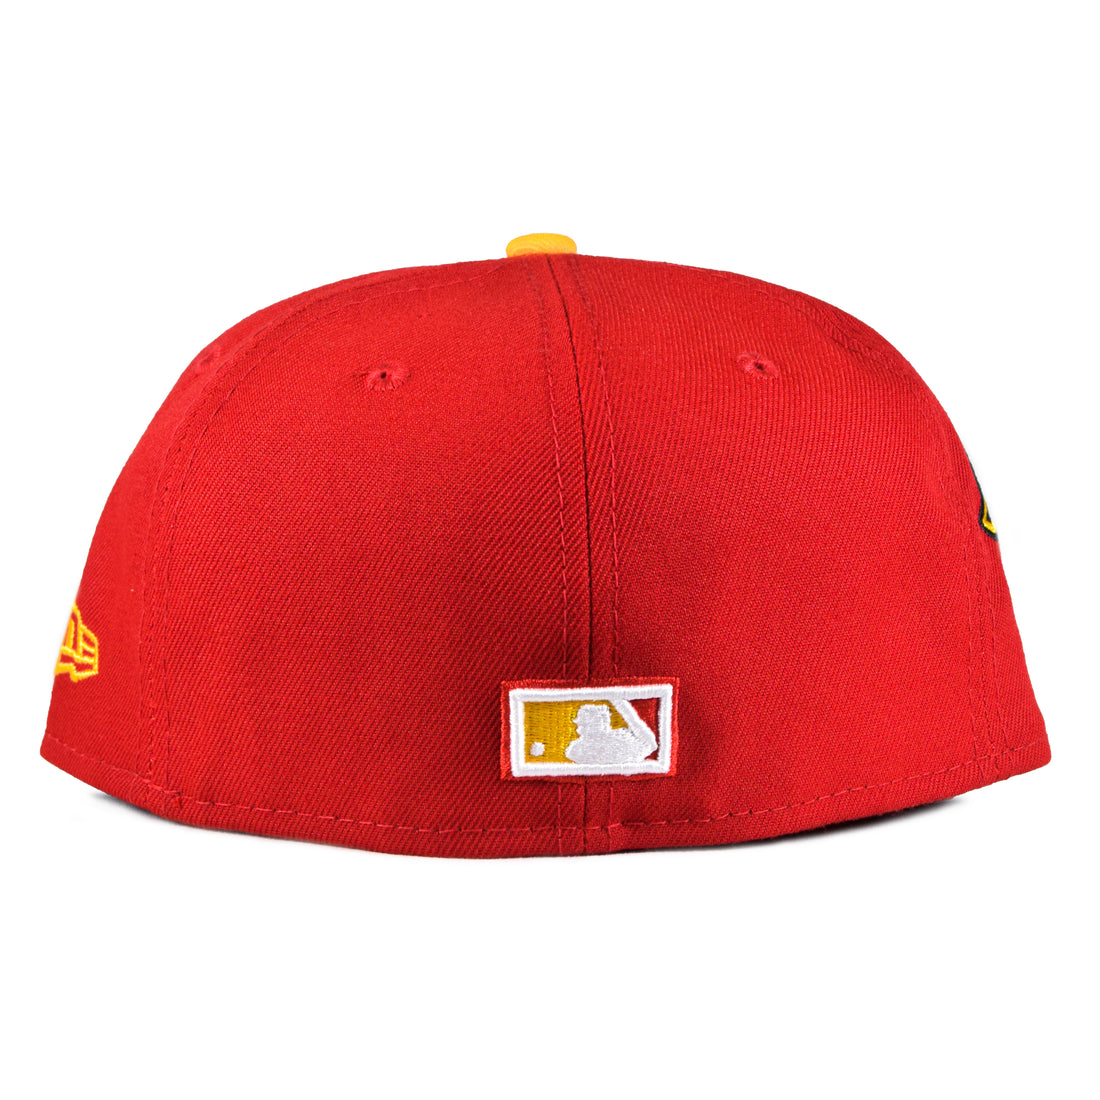 New Era Pittsburgh Pirates 59Fifty 2Tone Fitted - Red/Black - Pirate Gang